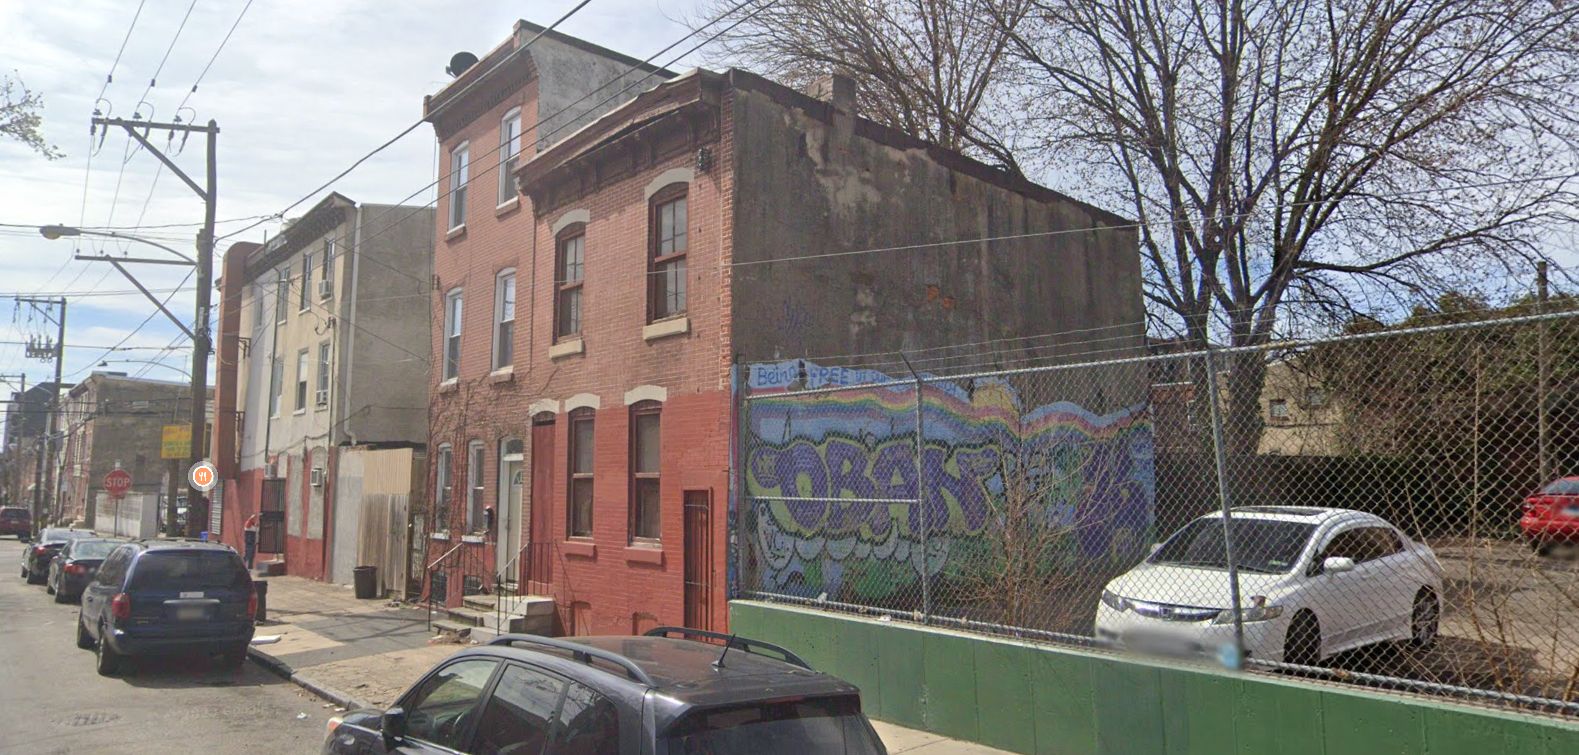 2008 North Mascher Street. Site conditions prior to redevelopment. Looking southwest. March 2023. Credit: Google Maps